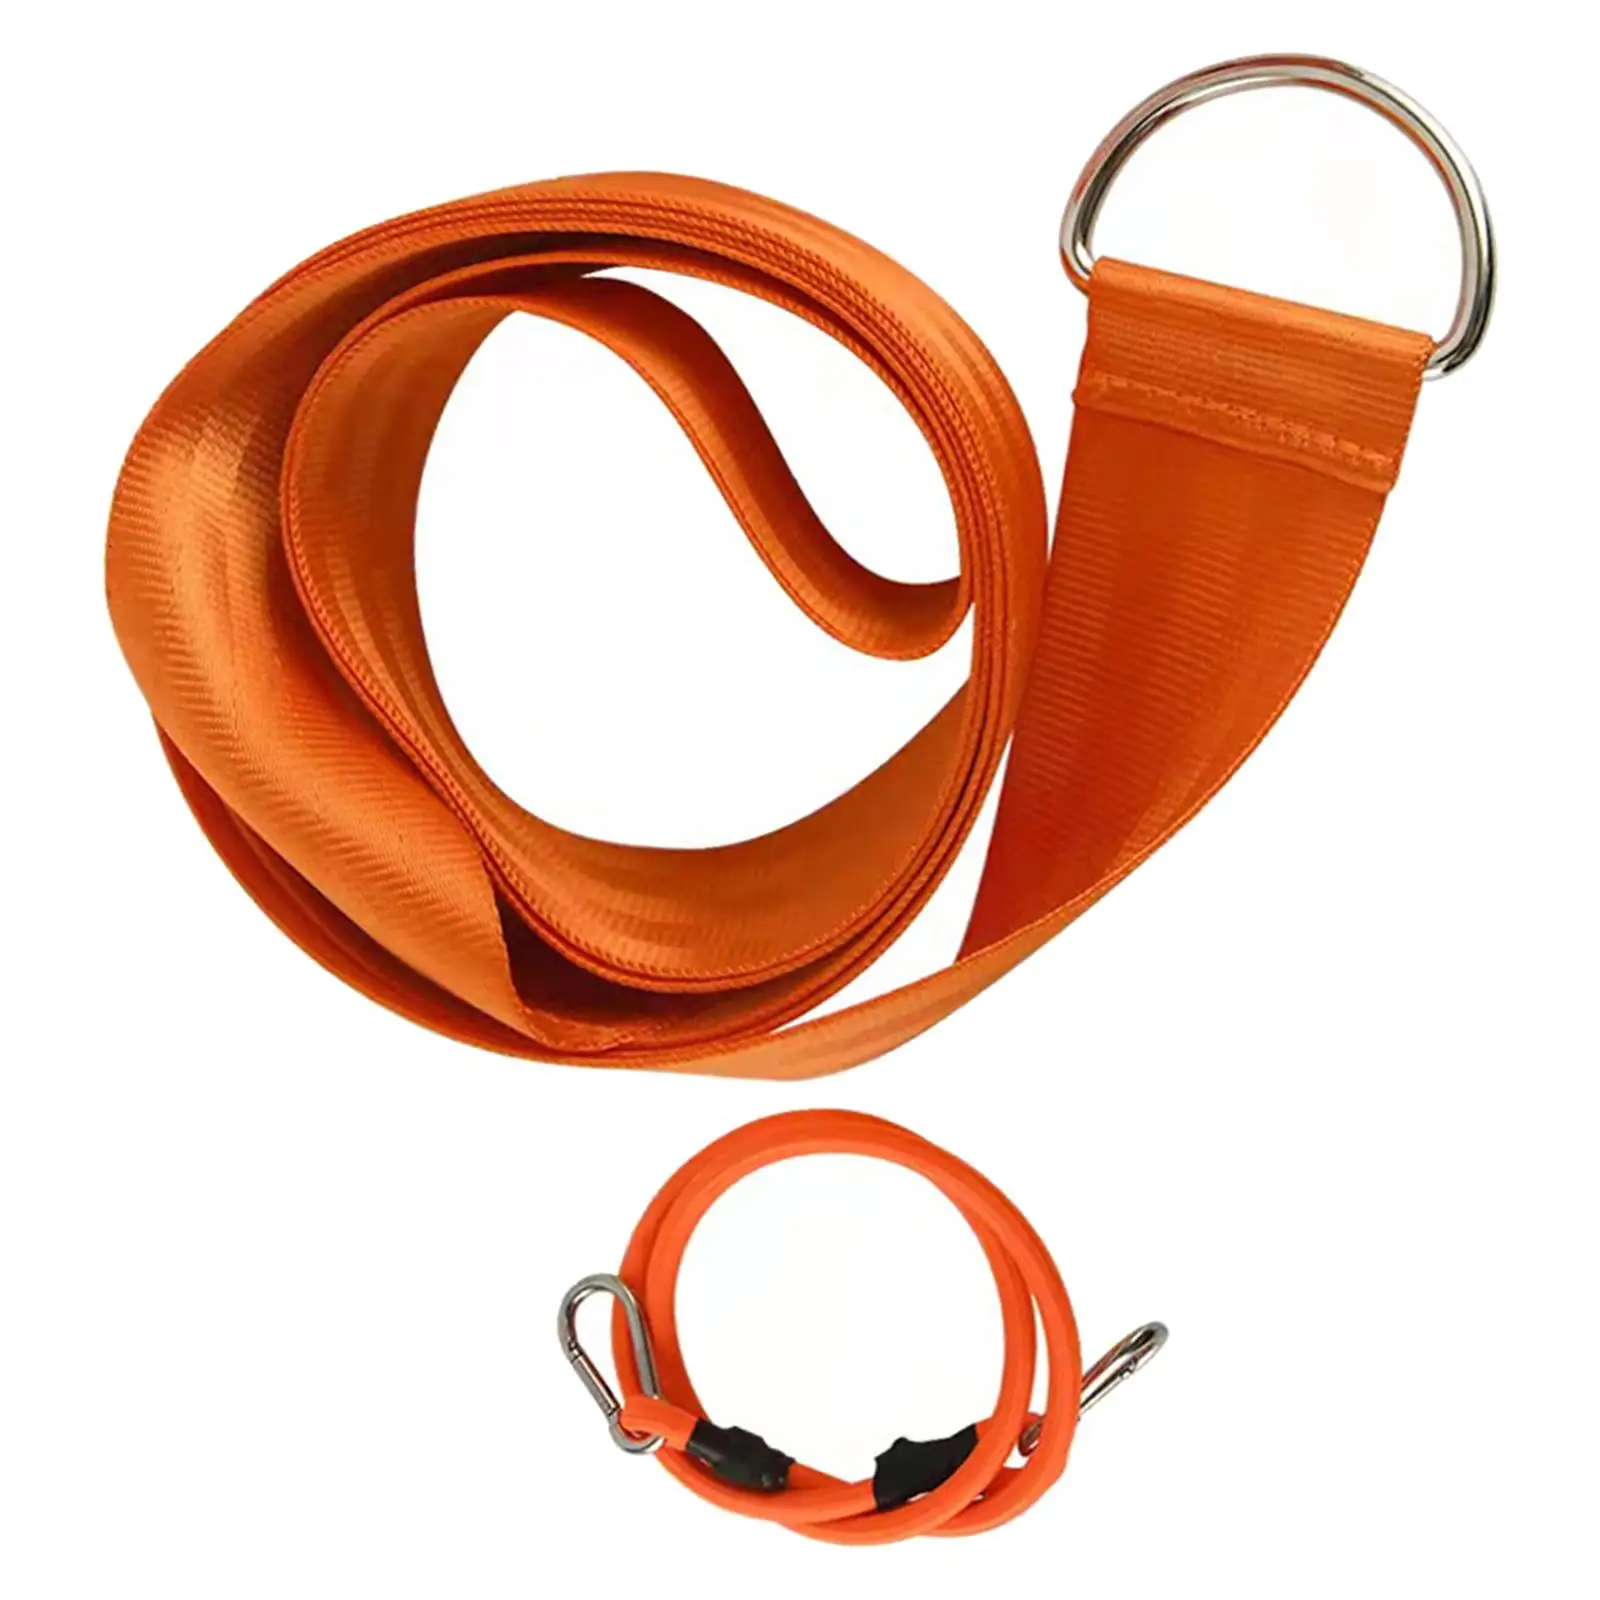 Tennis Trainer Belt Swing Practice Tools Trainer Equipment Exercise Speed Training Band for Yoga Football Indoor Outdoor